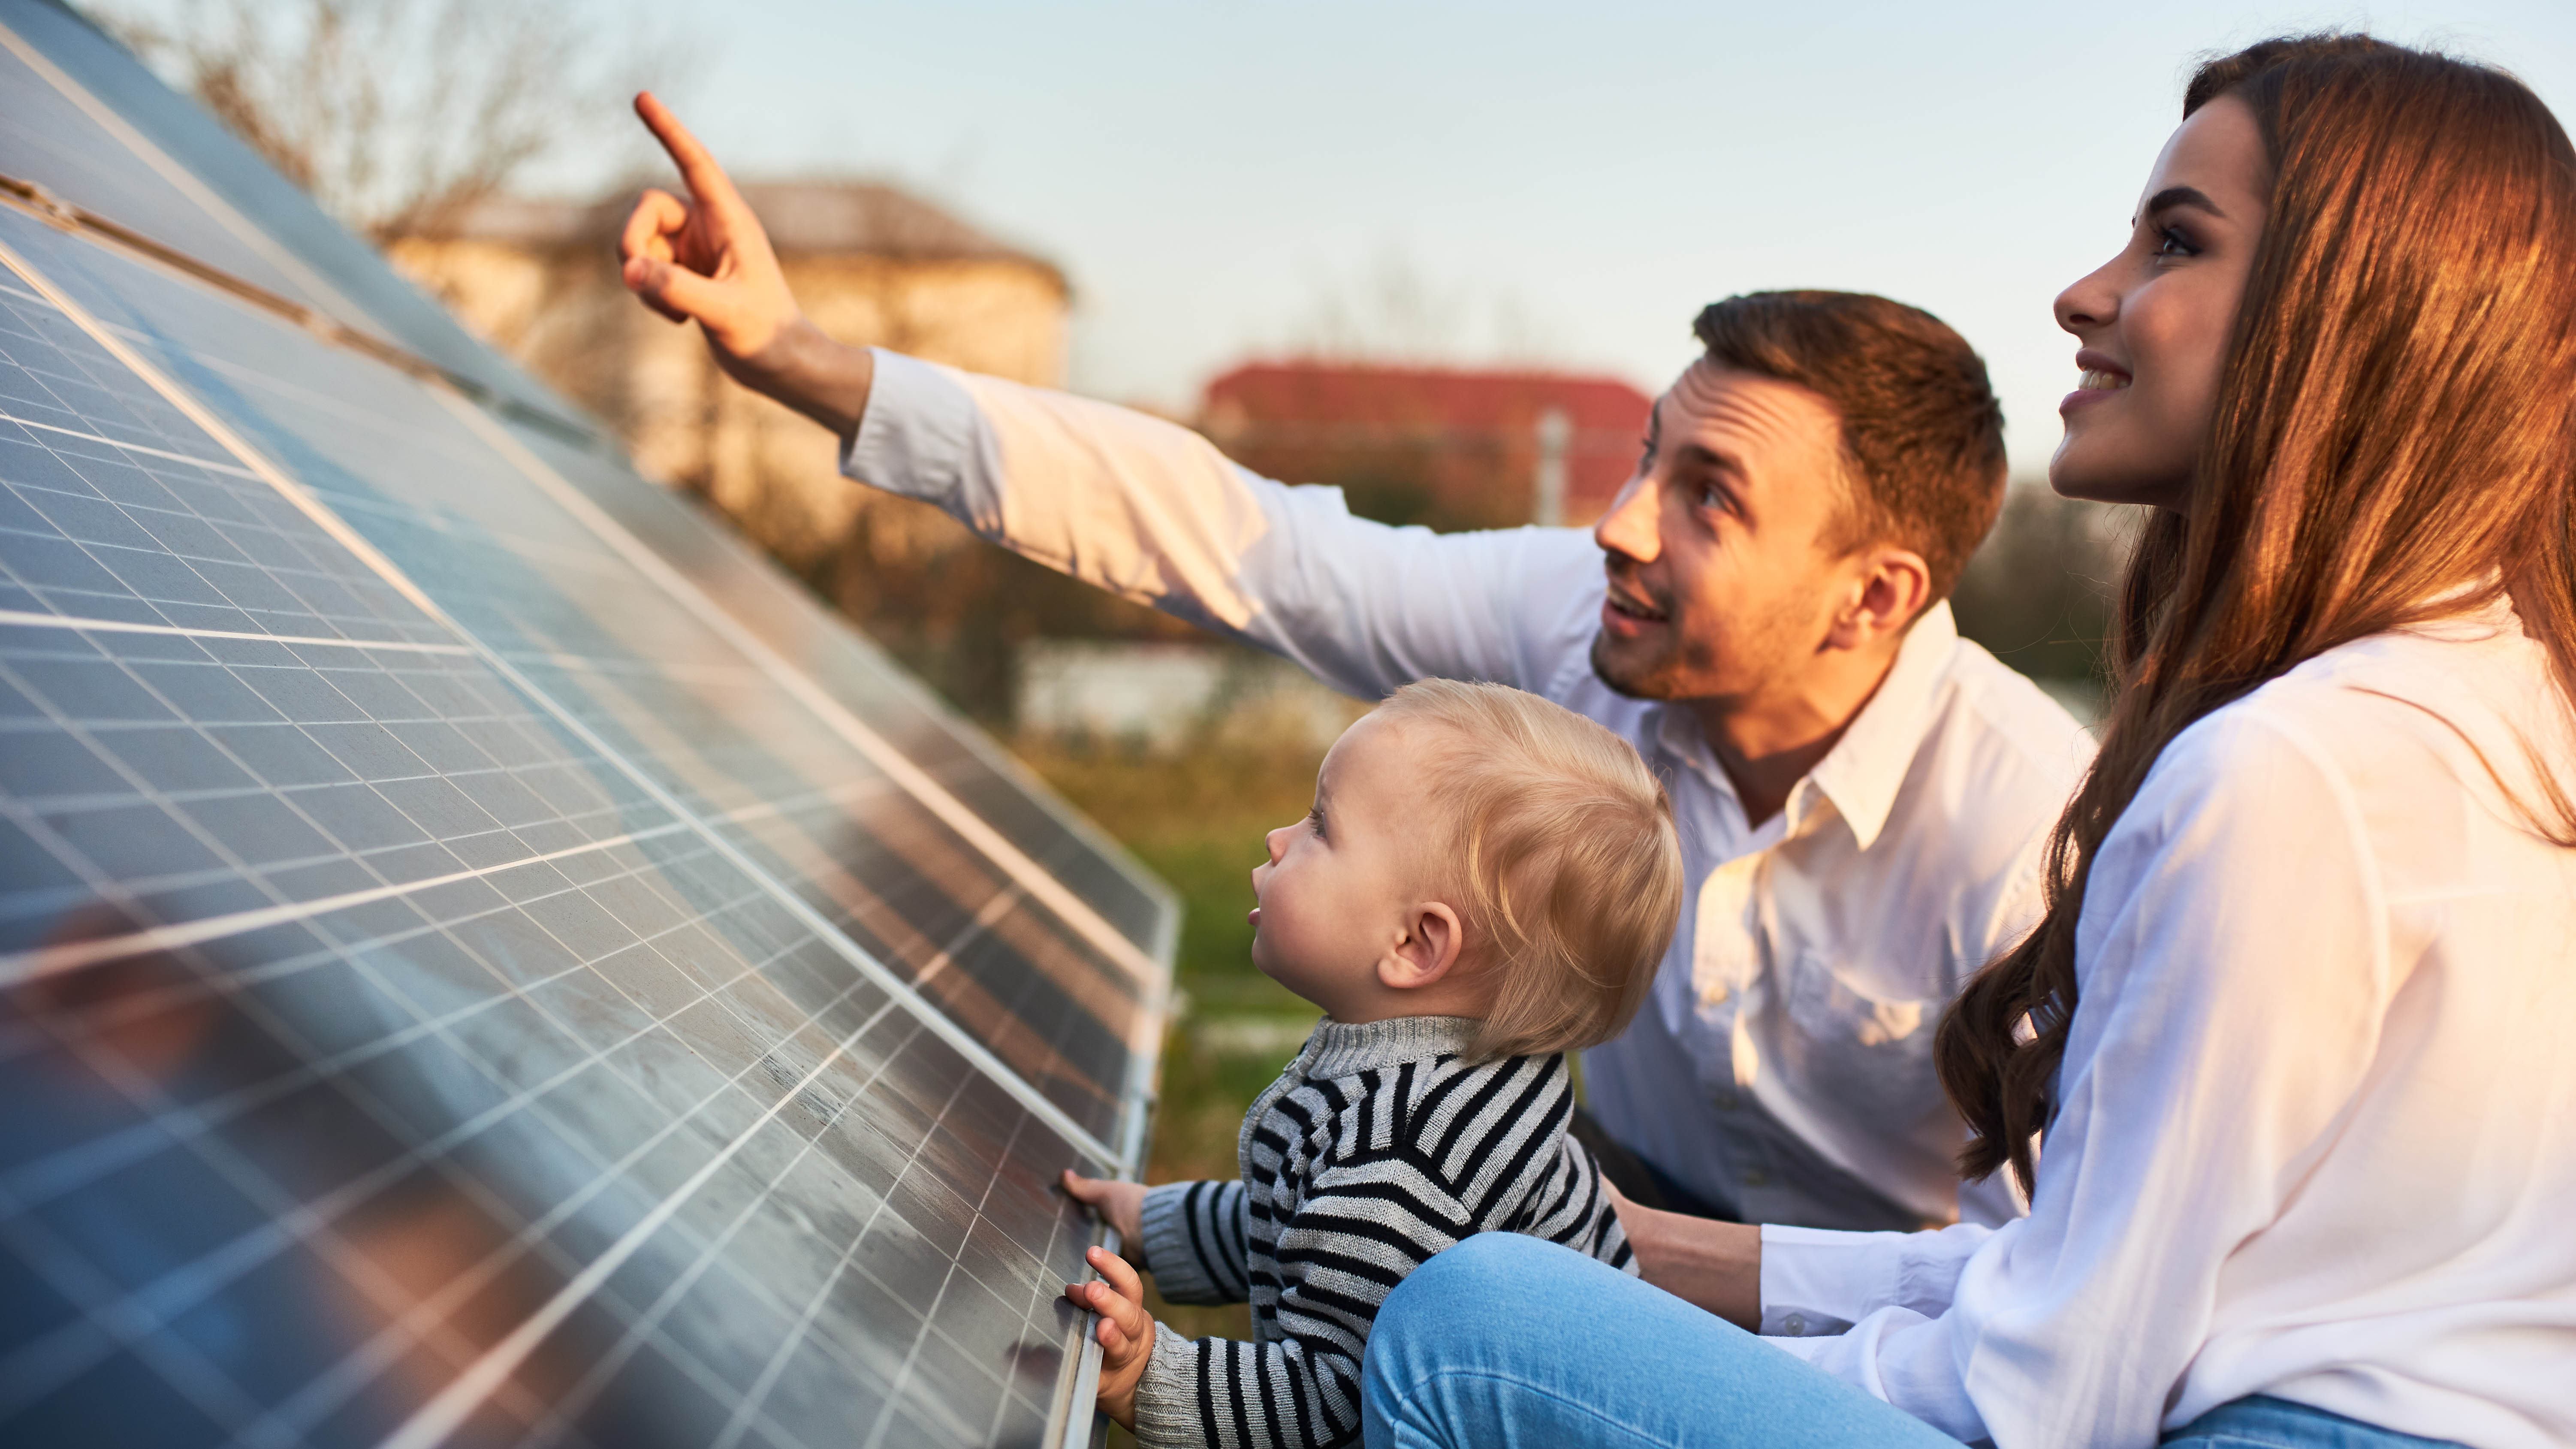 A family looking at a solar panel